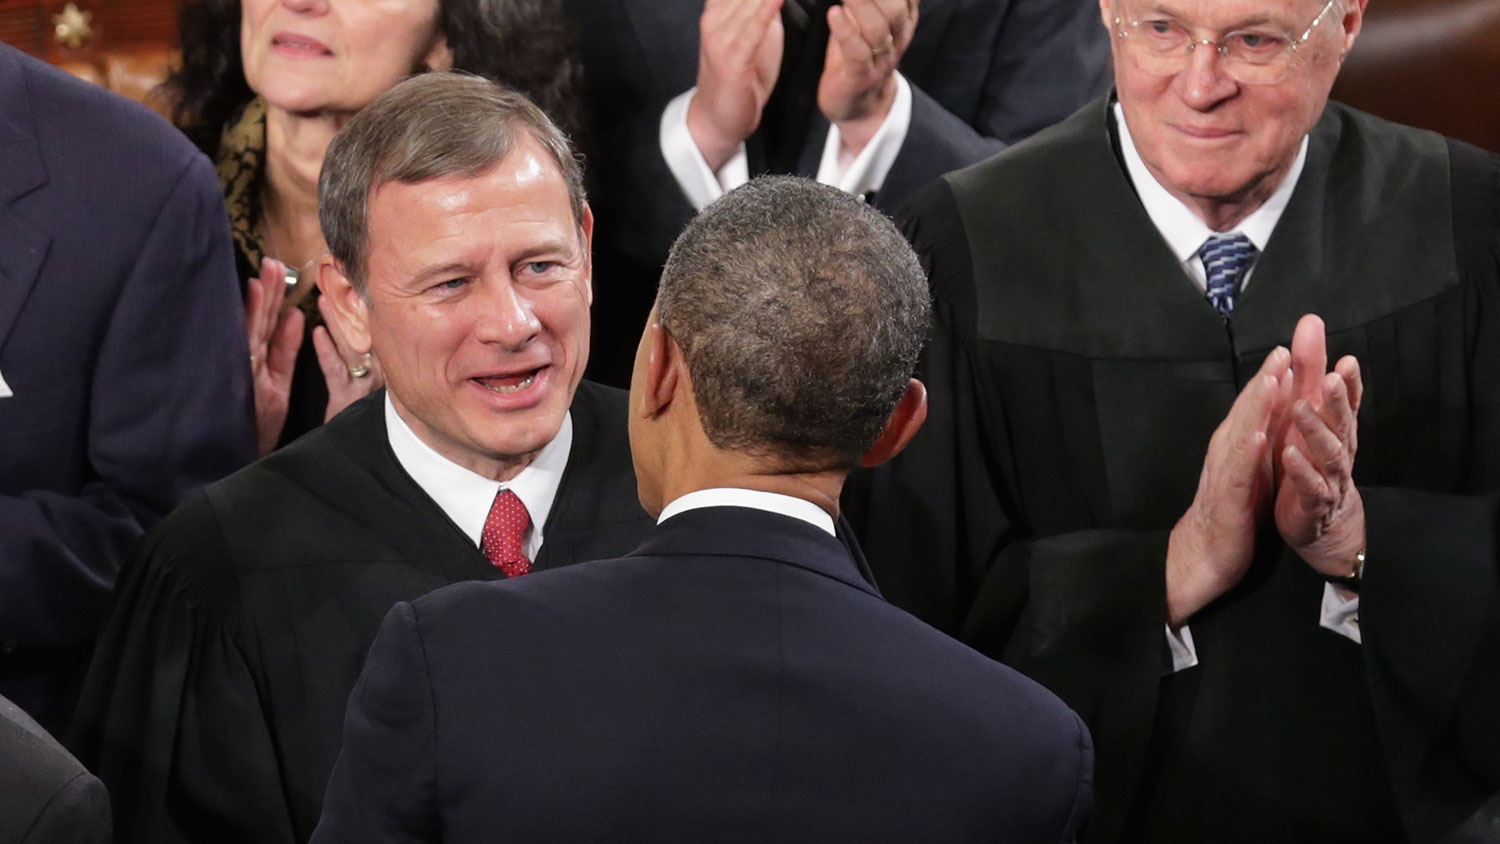 U.S. Supreme Court Chief Justice John Roberts (L) and Associate Justice Anthony Kennedy (R) talk with President Barack Obama before he delivers the State of the Union address to a joint session of Congress in the House Chamber at the U.S. Capitol on January 28, 2014 in Washington, DC.
